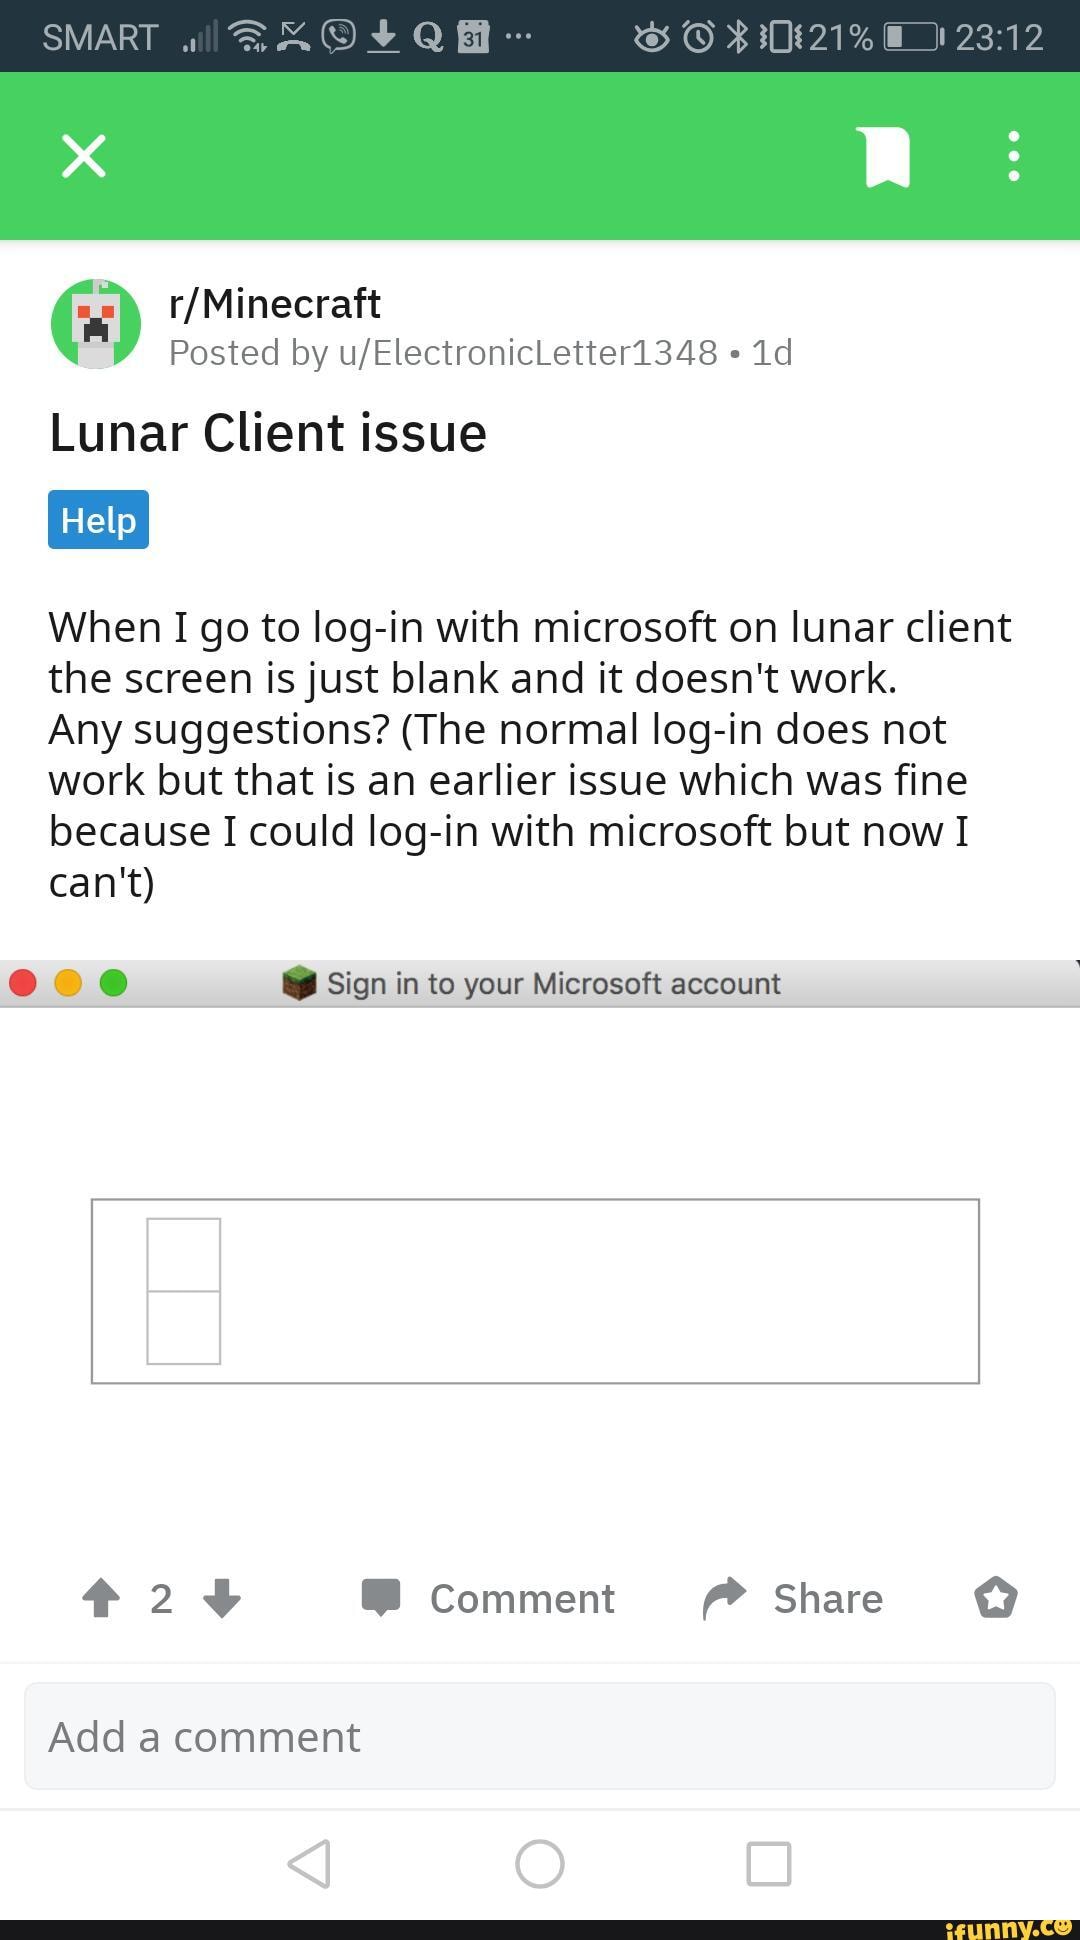 How do you login to Lunar Client with a Microsoft account?